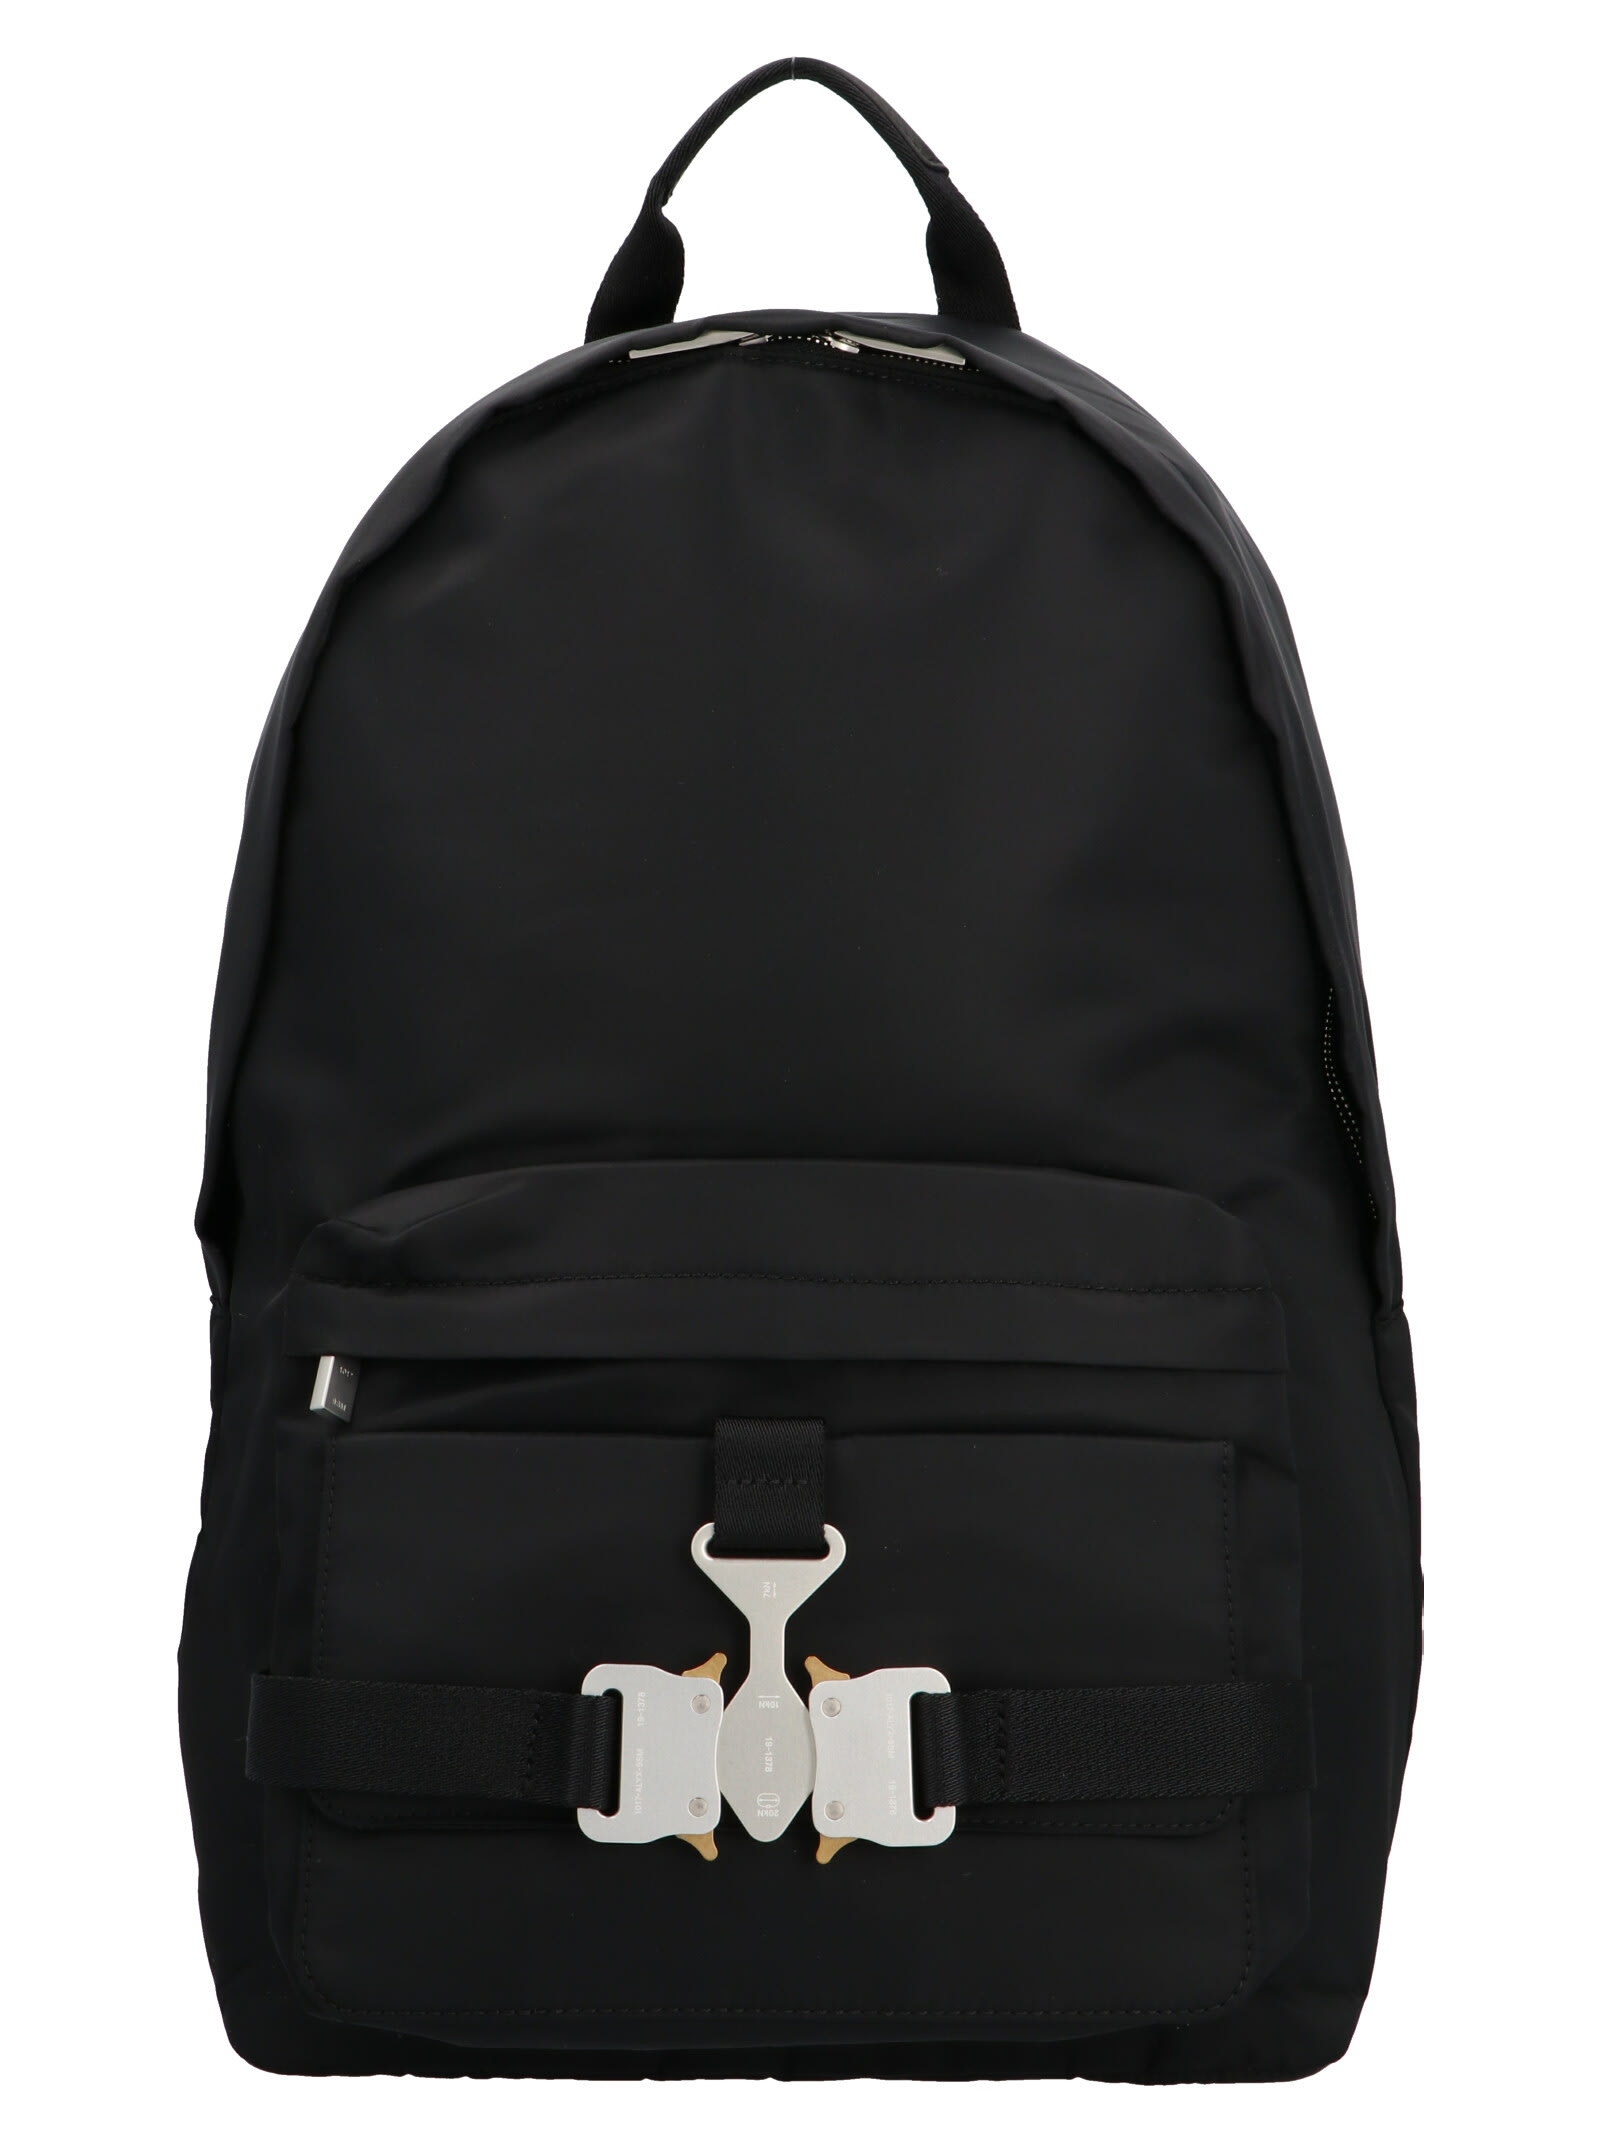 1017 ALYX 9SM tricon Backpack Bag